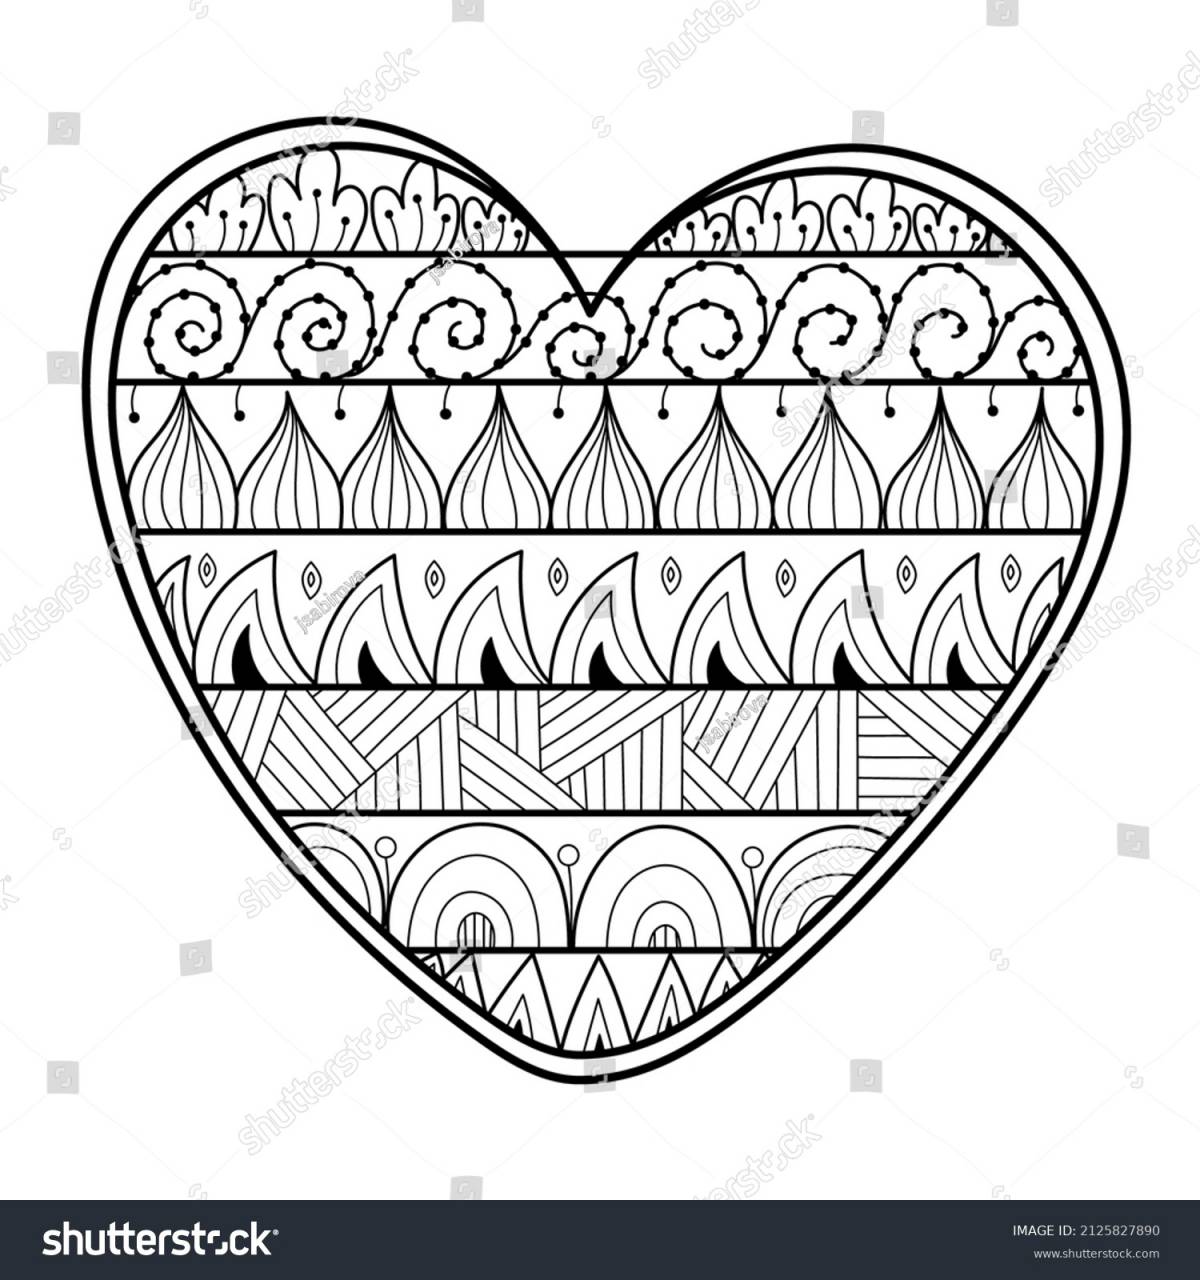 Living heart coloring book